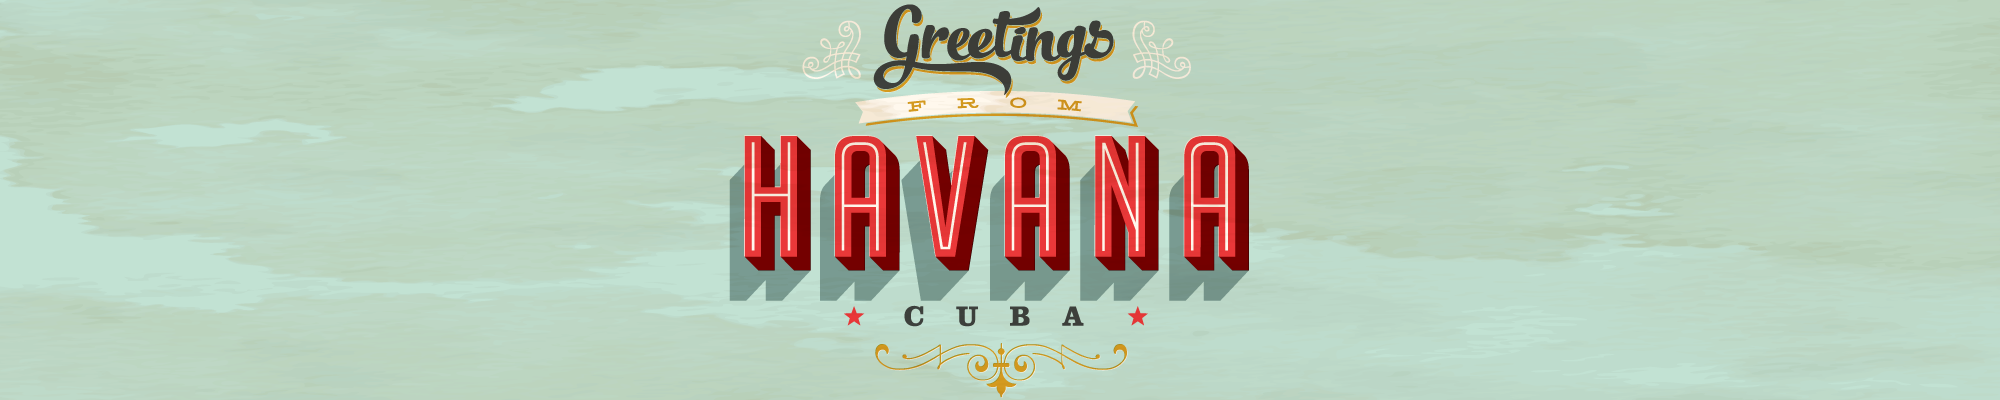 cruise from miami to havana